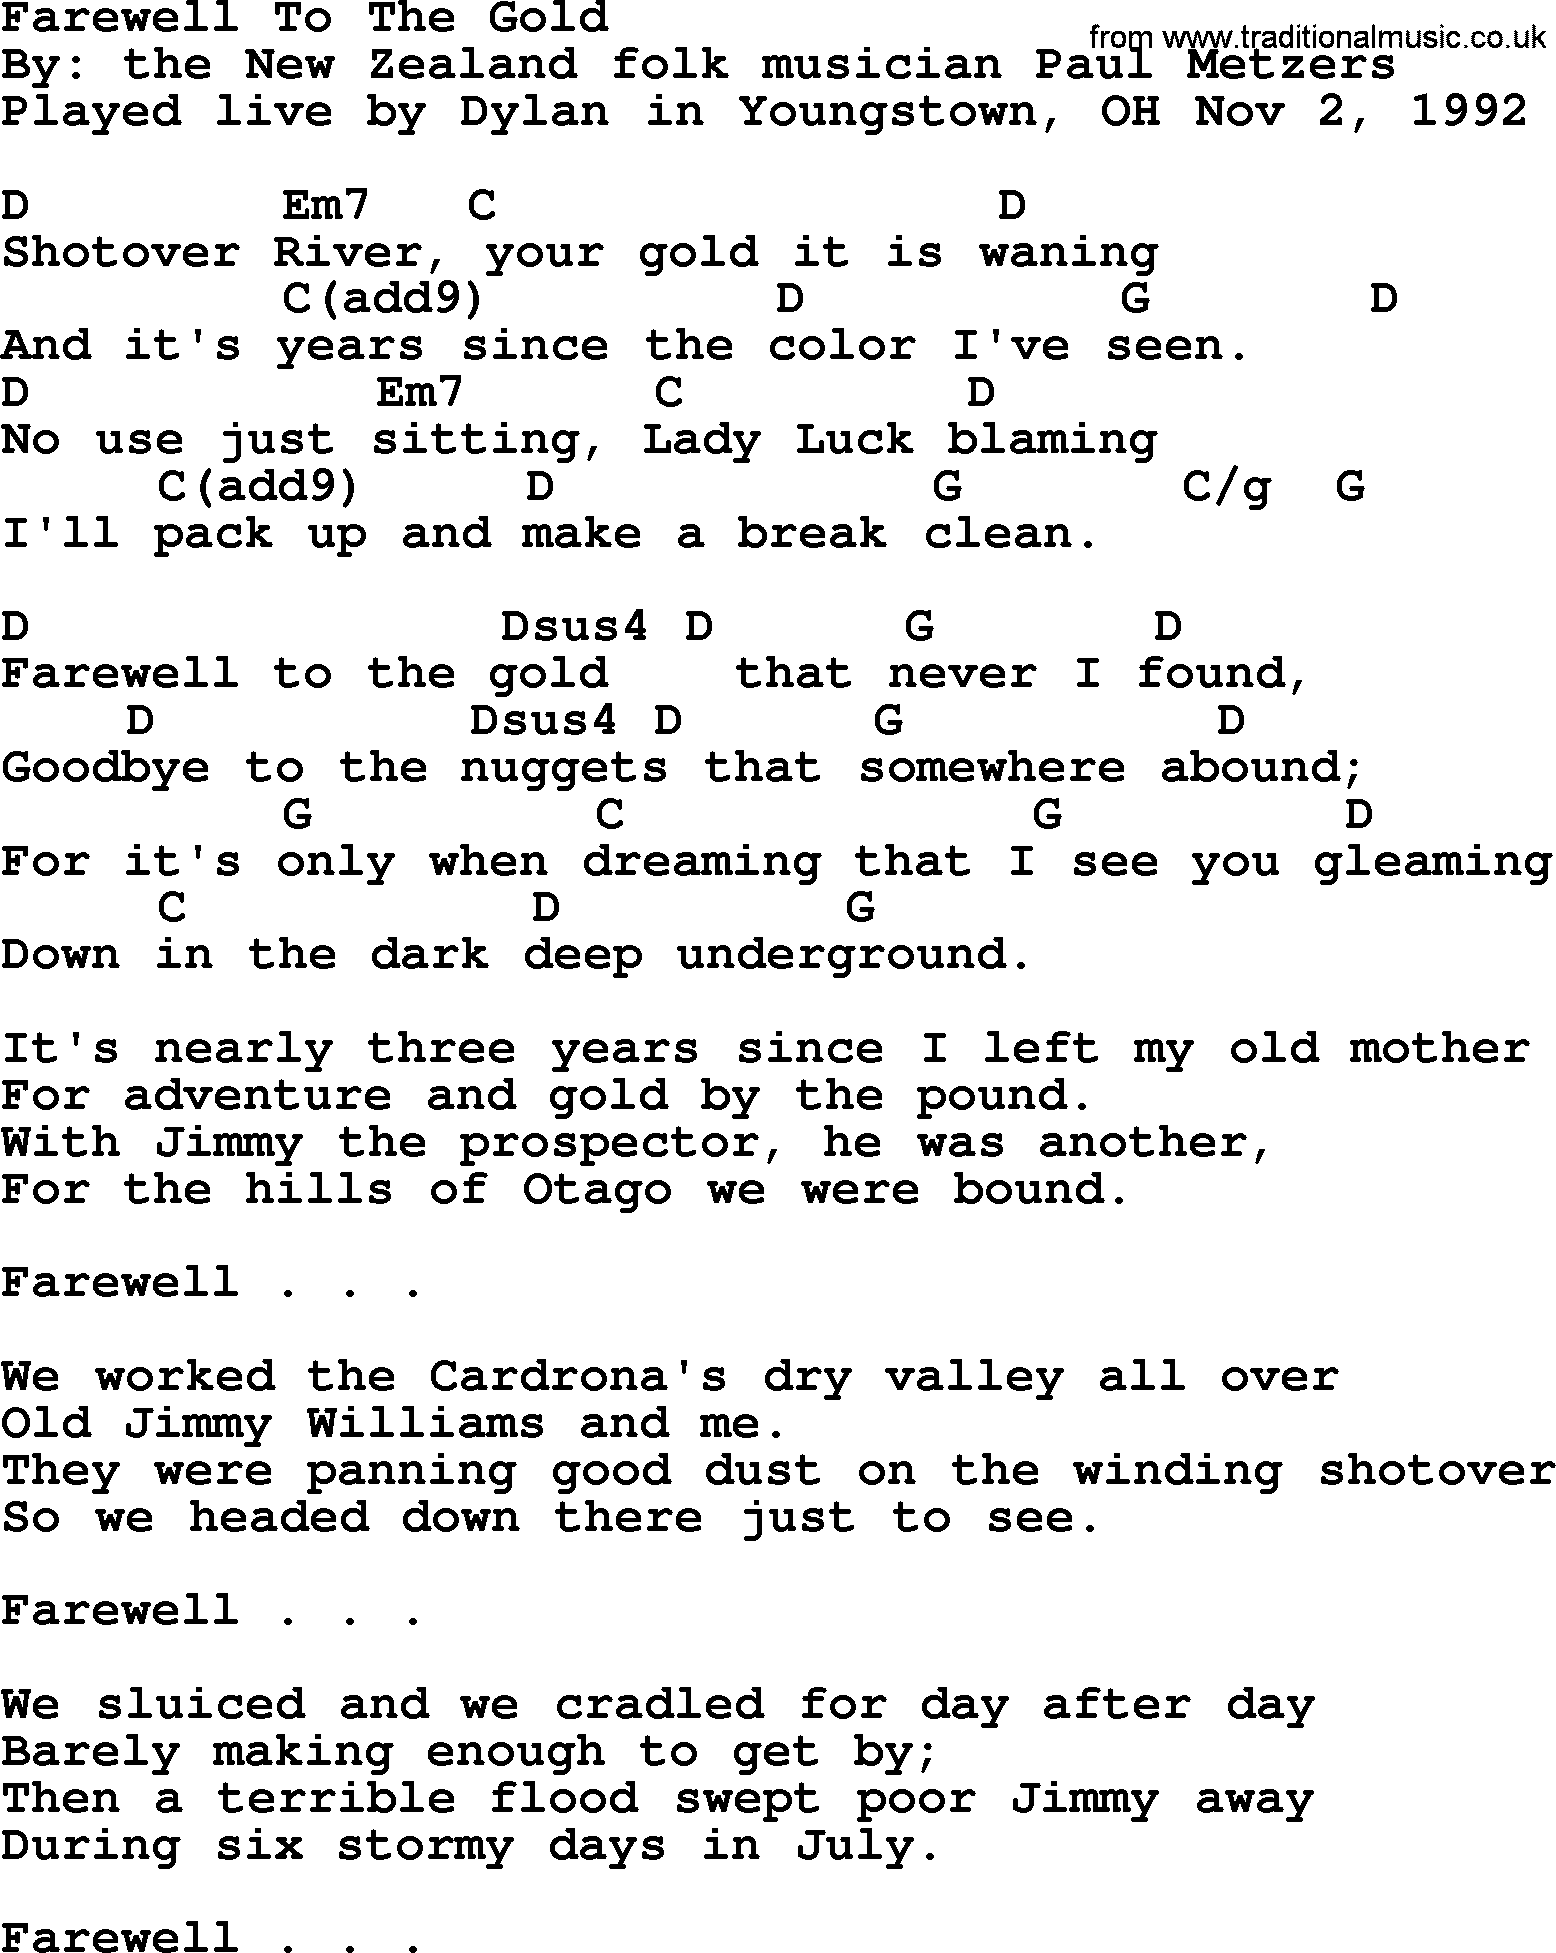 Bob Dylan song, lyrics with chords - Farewell To The Gold